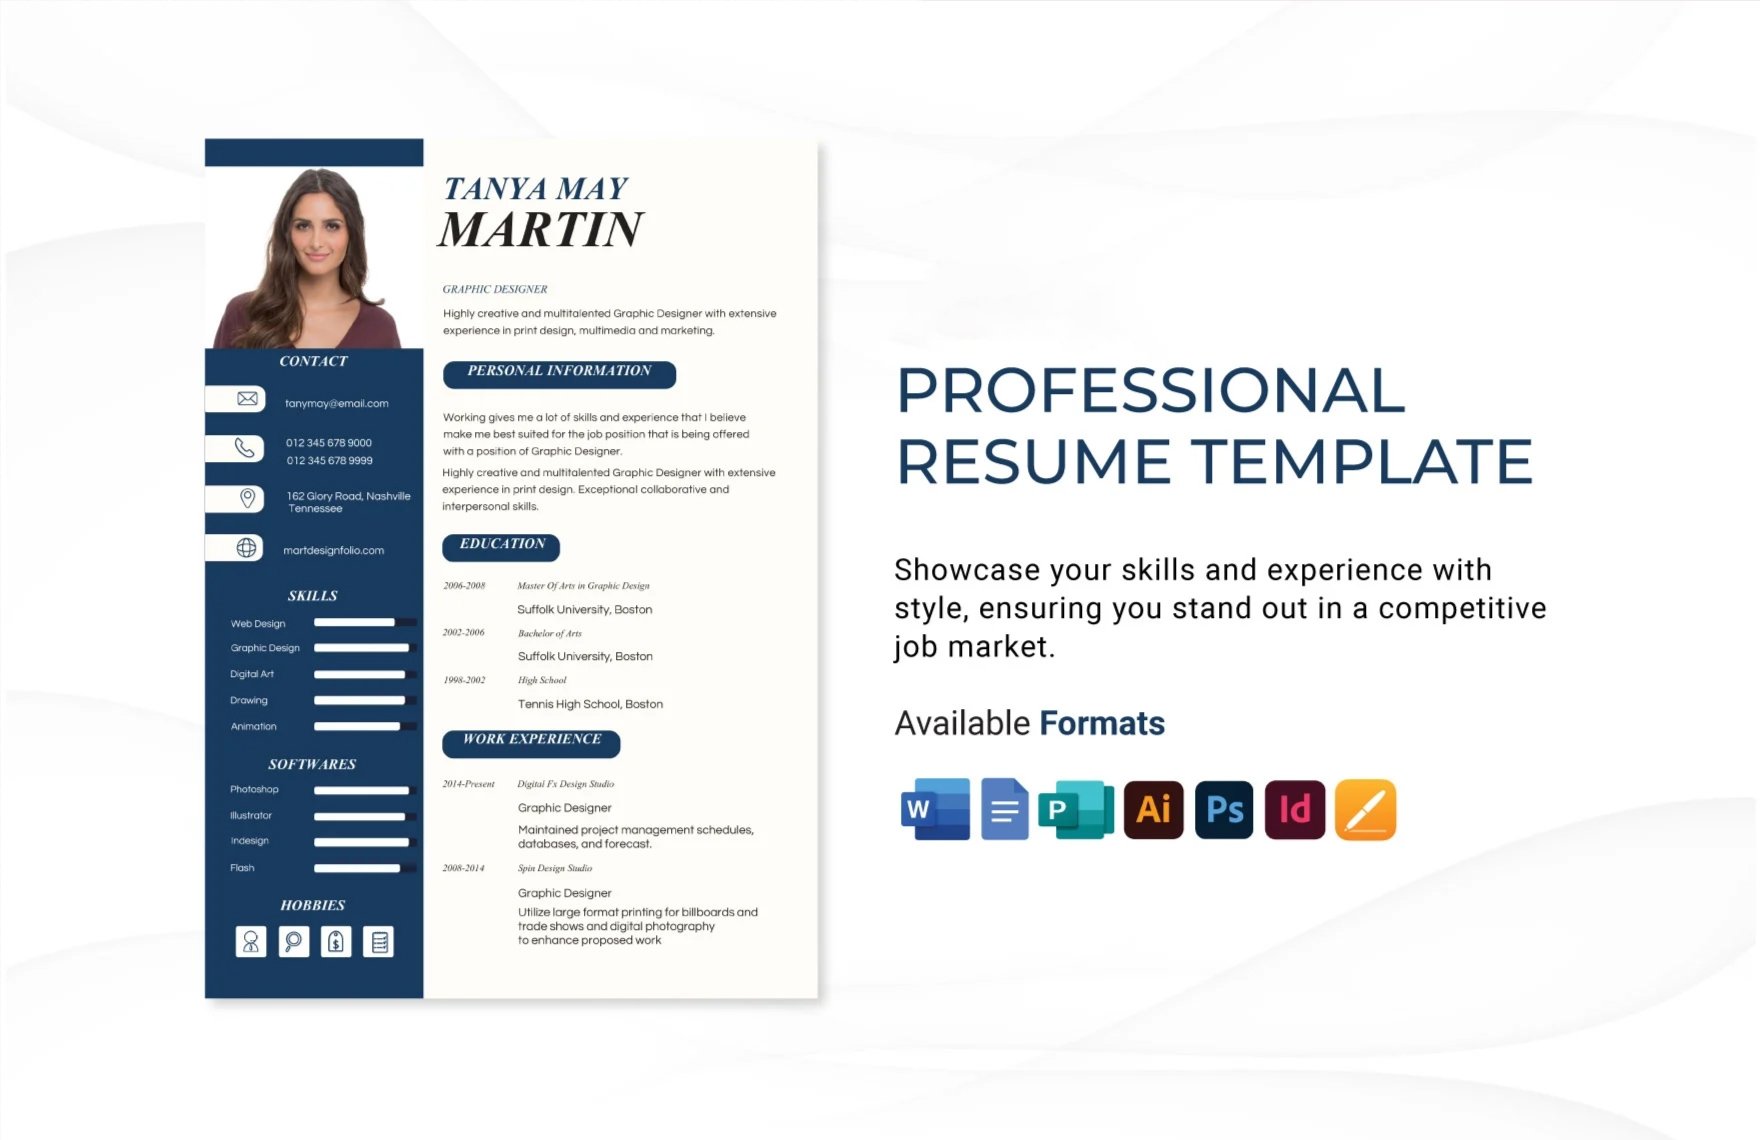 Professional Resume Template in Word, PDF, Illustrator, PSD, Apple Pages, Publisher, InDesign